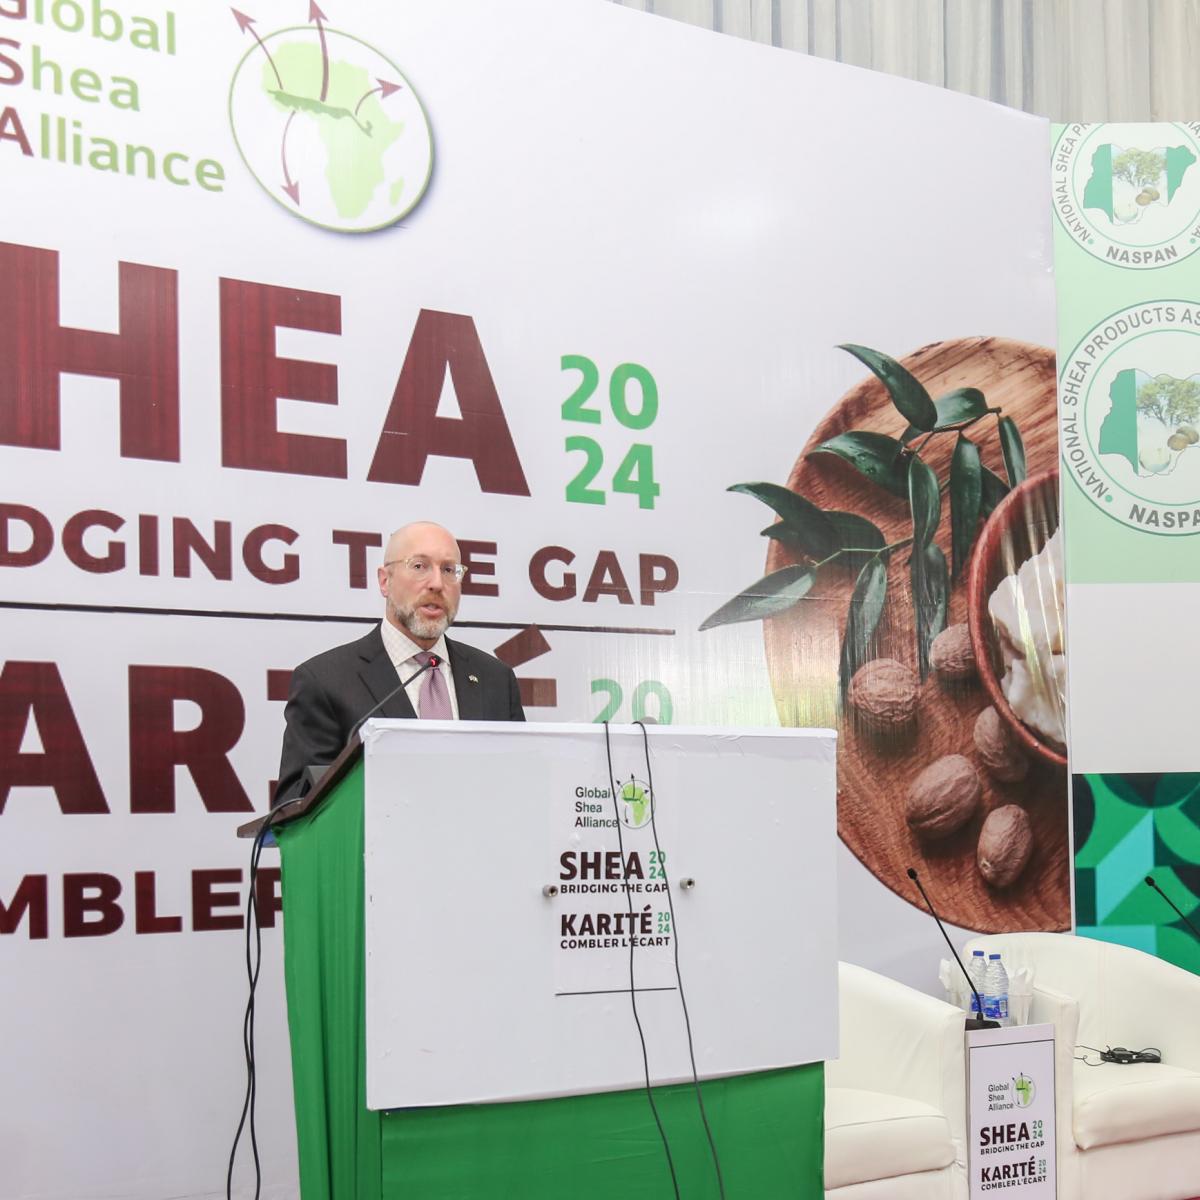 The United States government, in partnership with the Global Shea Alliance (GSA), the non-profit industry association with a mission to promote sustainability, quality practices and standards for shea in food and cosmetics, held its annual conference in Abuja.